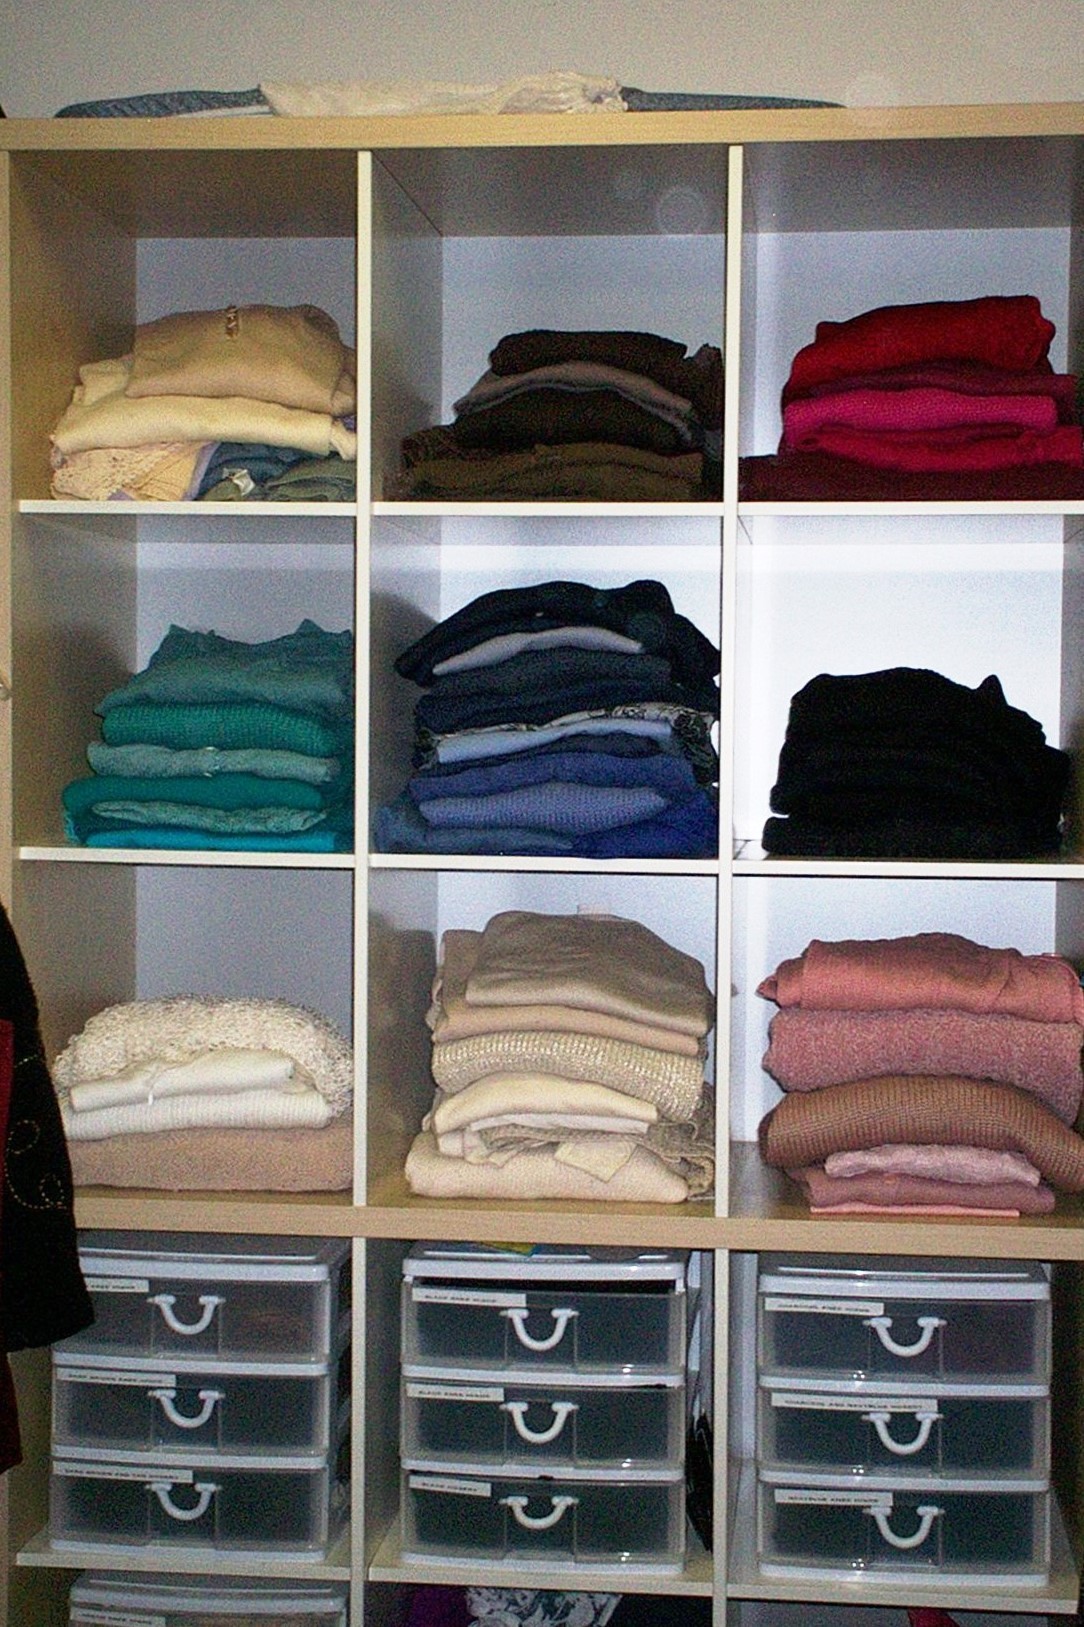 Reduce clutter with an organized closet